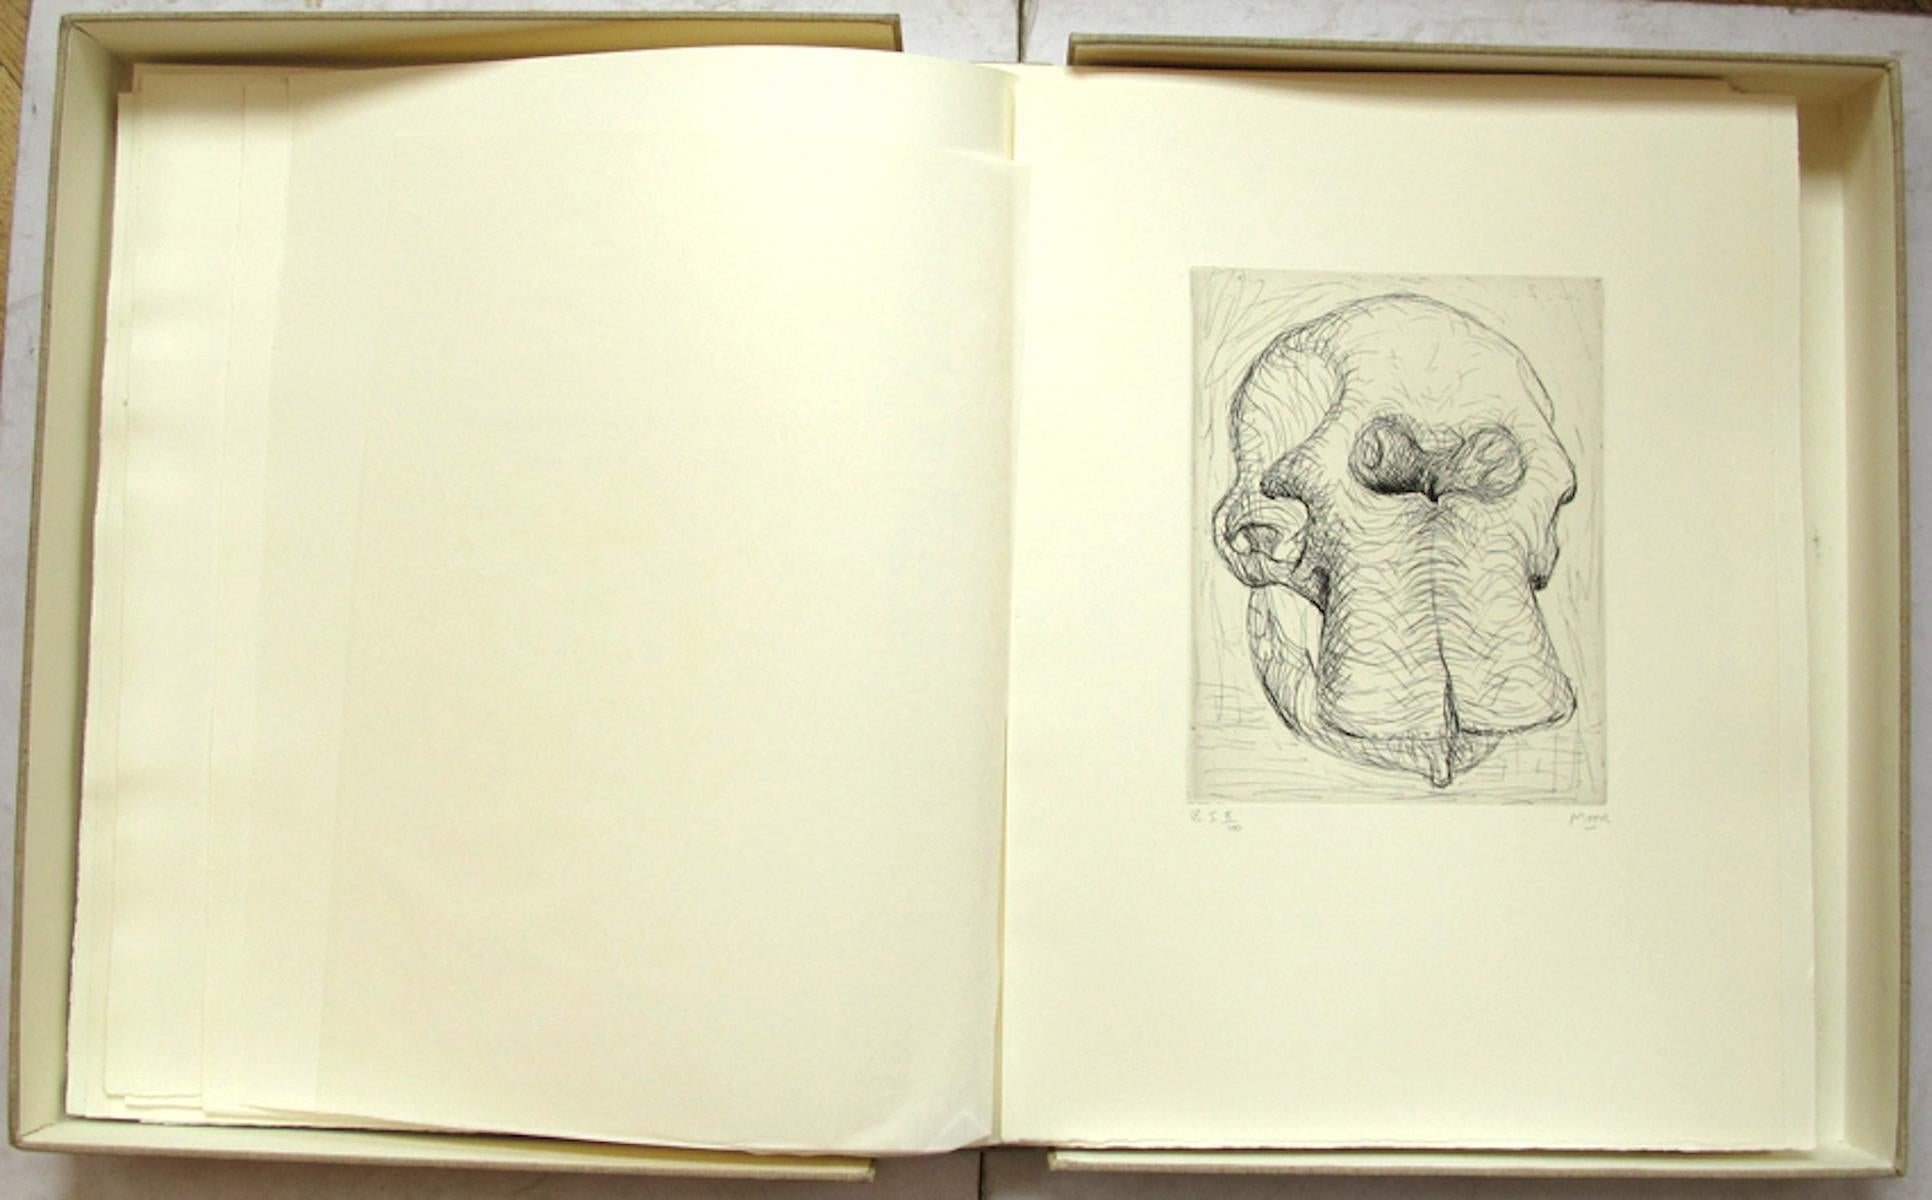 Elephant Skull  is an original modern rare book illustrated by Henry Moore  and written by various authors in 1970 .

Published by Gérald Cramer, Geneva.

Original First Collected edition.

Format: in Folio (535 x 408 mm). Sheet Size: 498 x 366